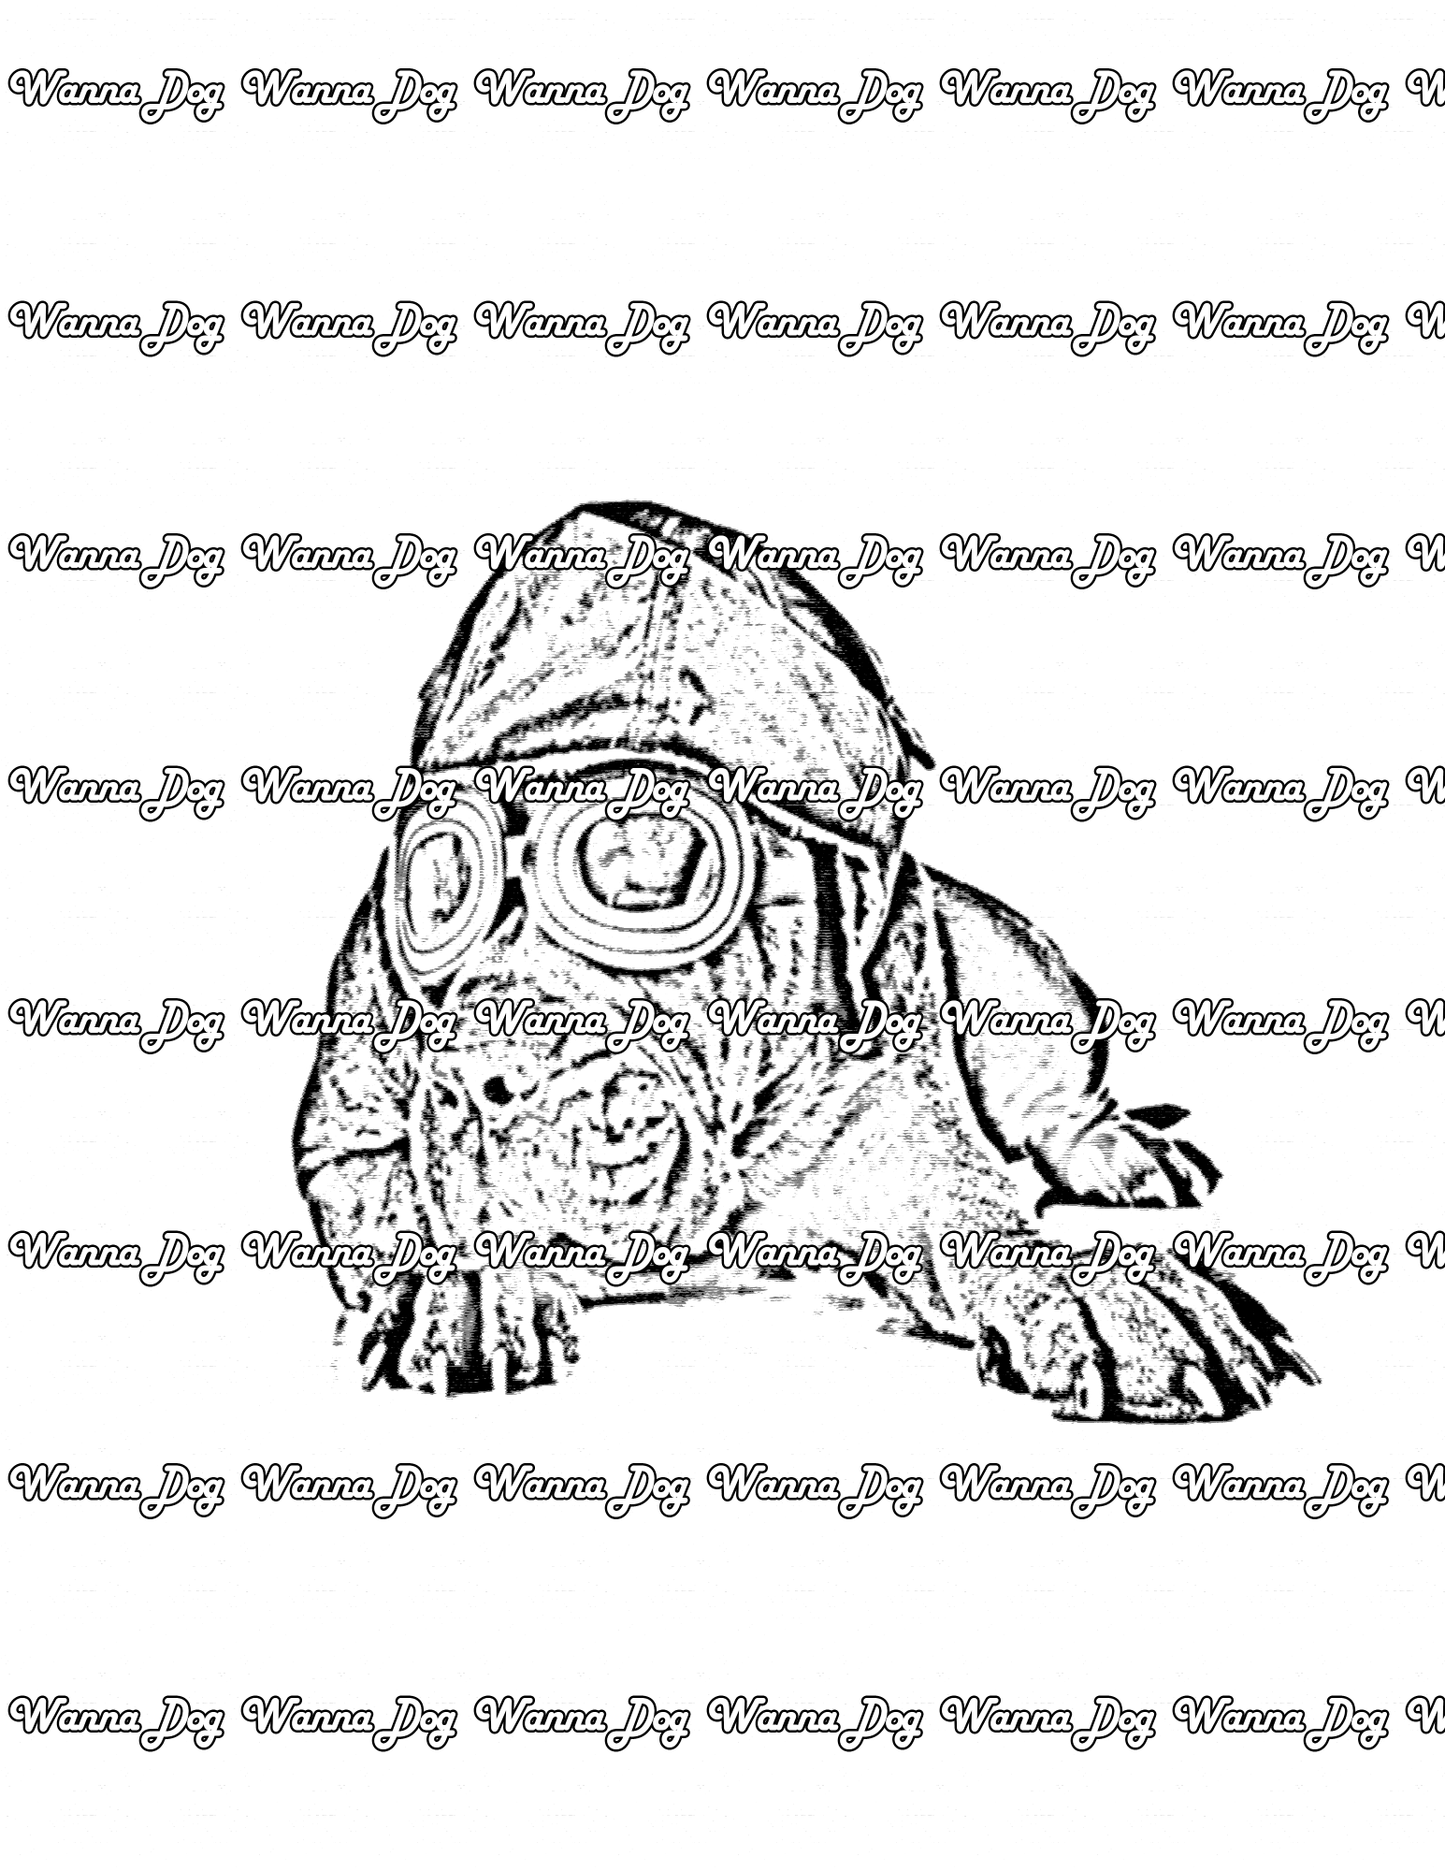 Mastiff Coloring Page of a Mastiff wearing pilot gear